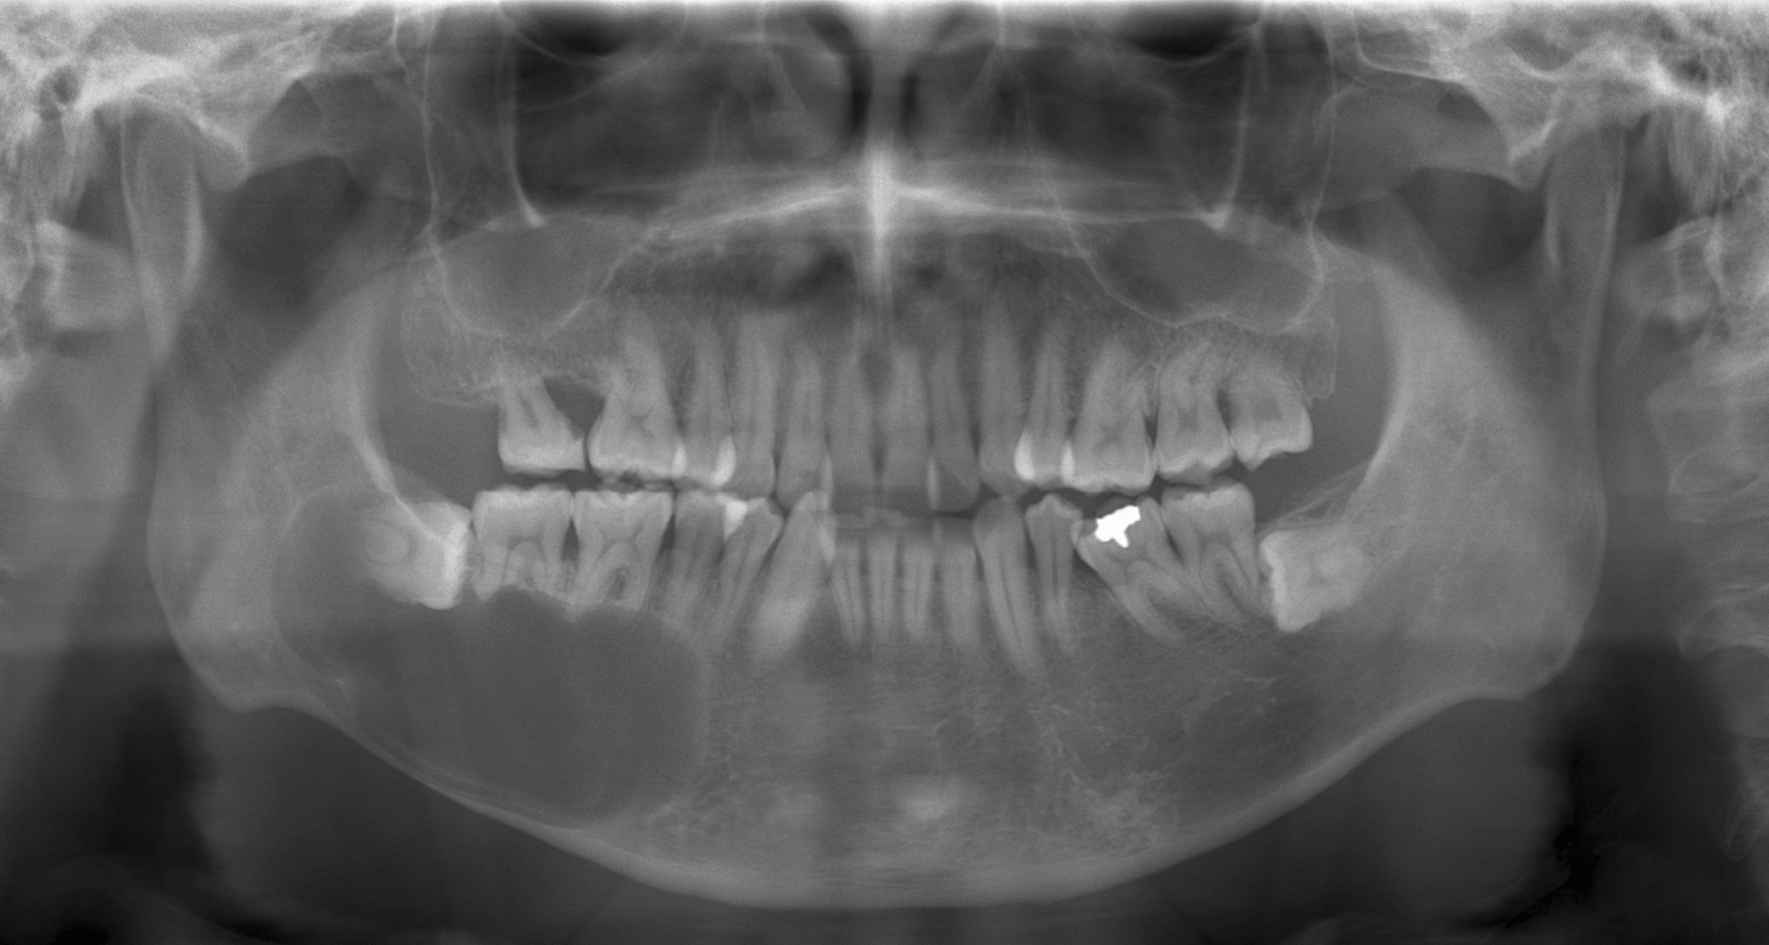 Dentigerous cysts suspected the other odontogenic lesions on panoramic radiography and CT